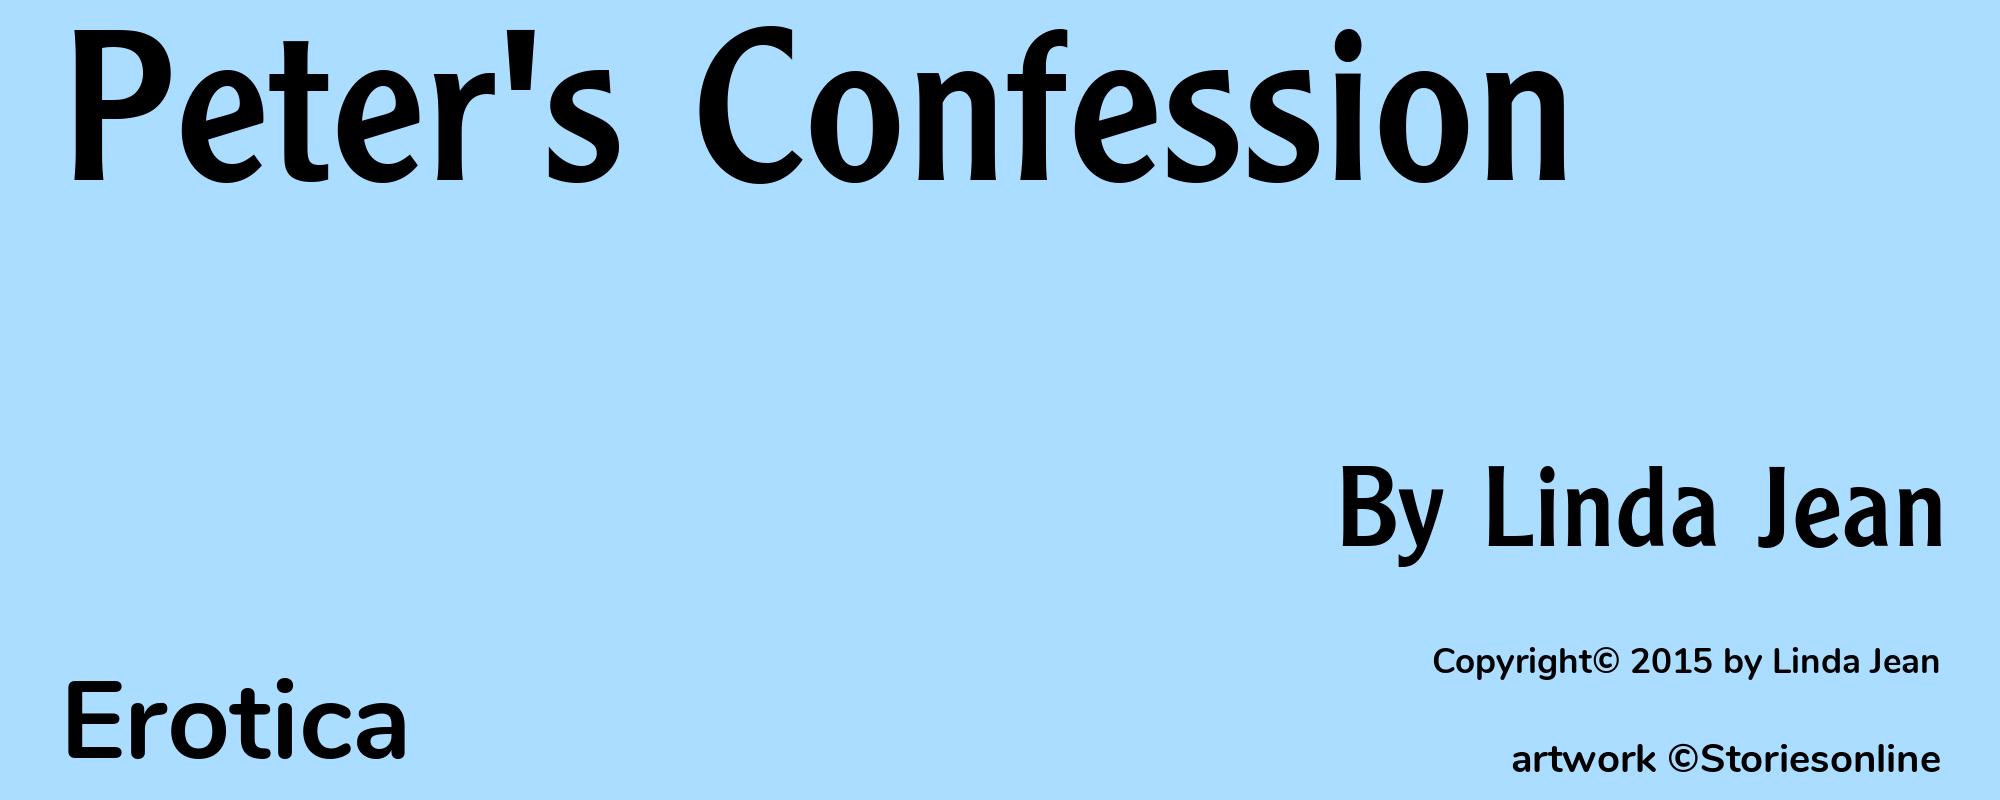 Peter's Confession - Cover